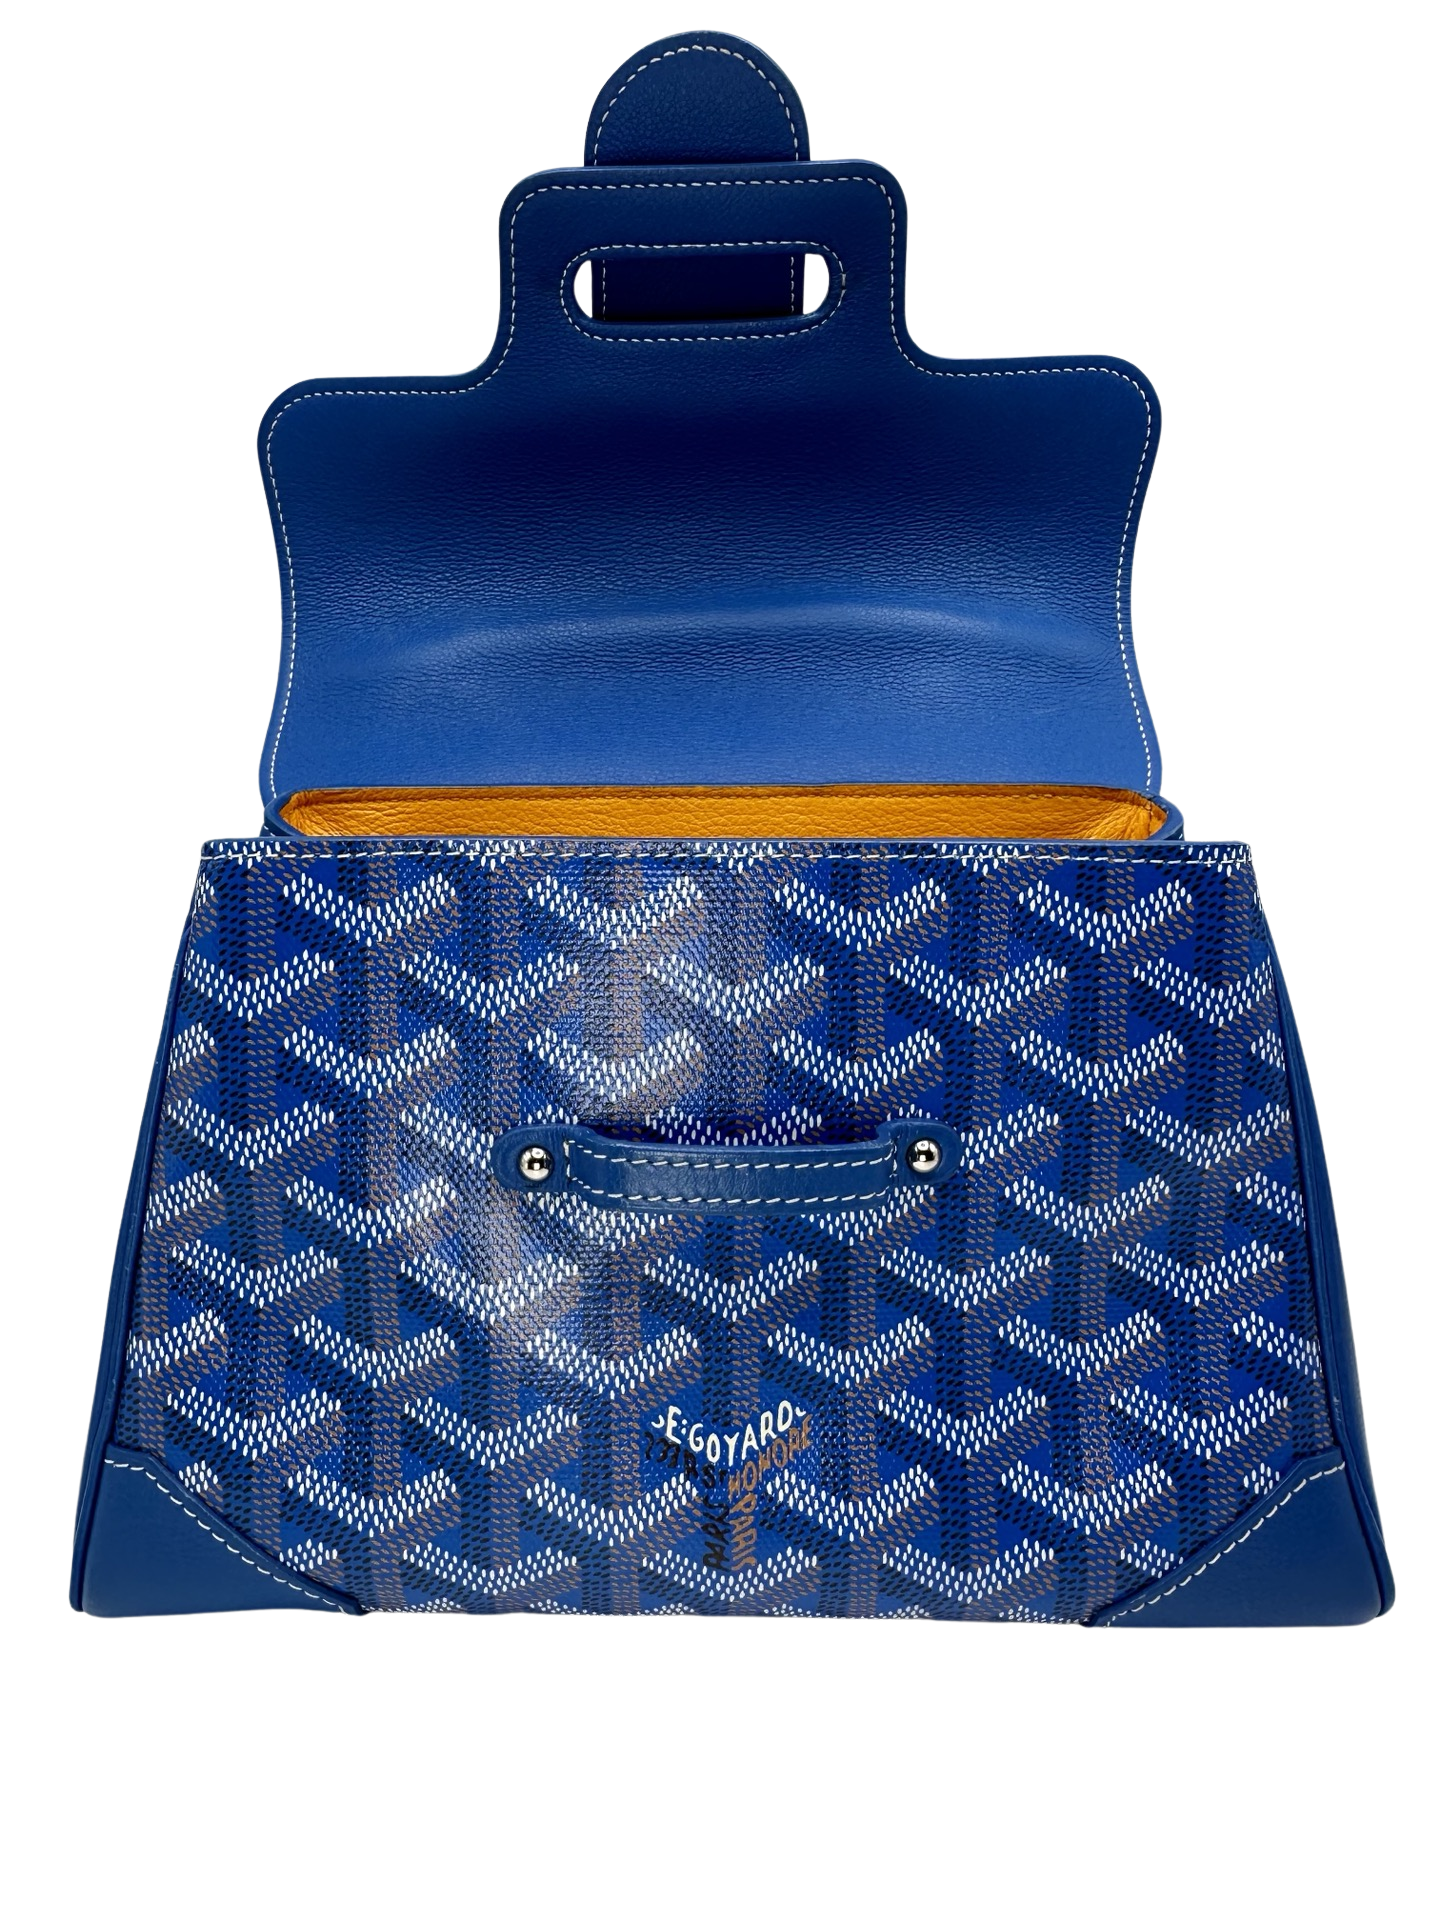 Pictured: The Goyard Goyardine Saigon Souple mini bag in sky blue with the top of the bag opened. No imperfections.